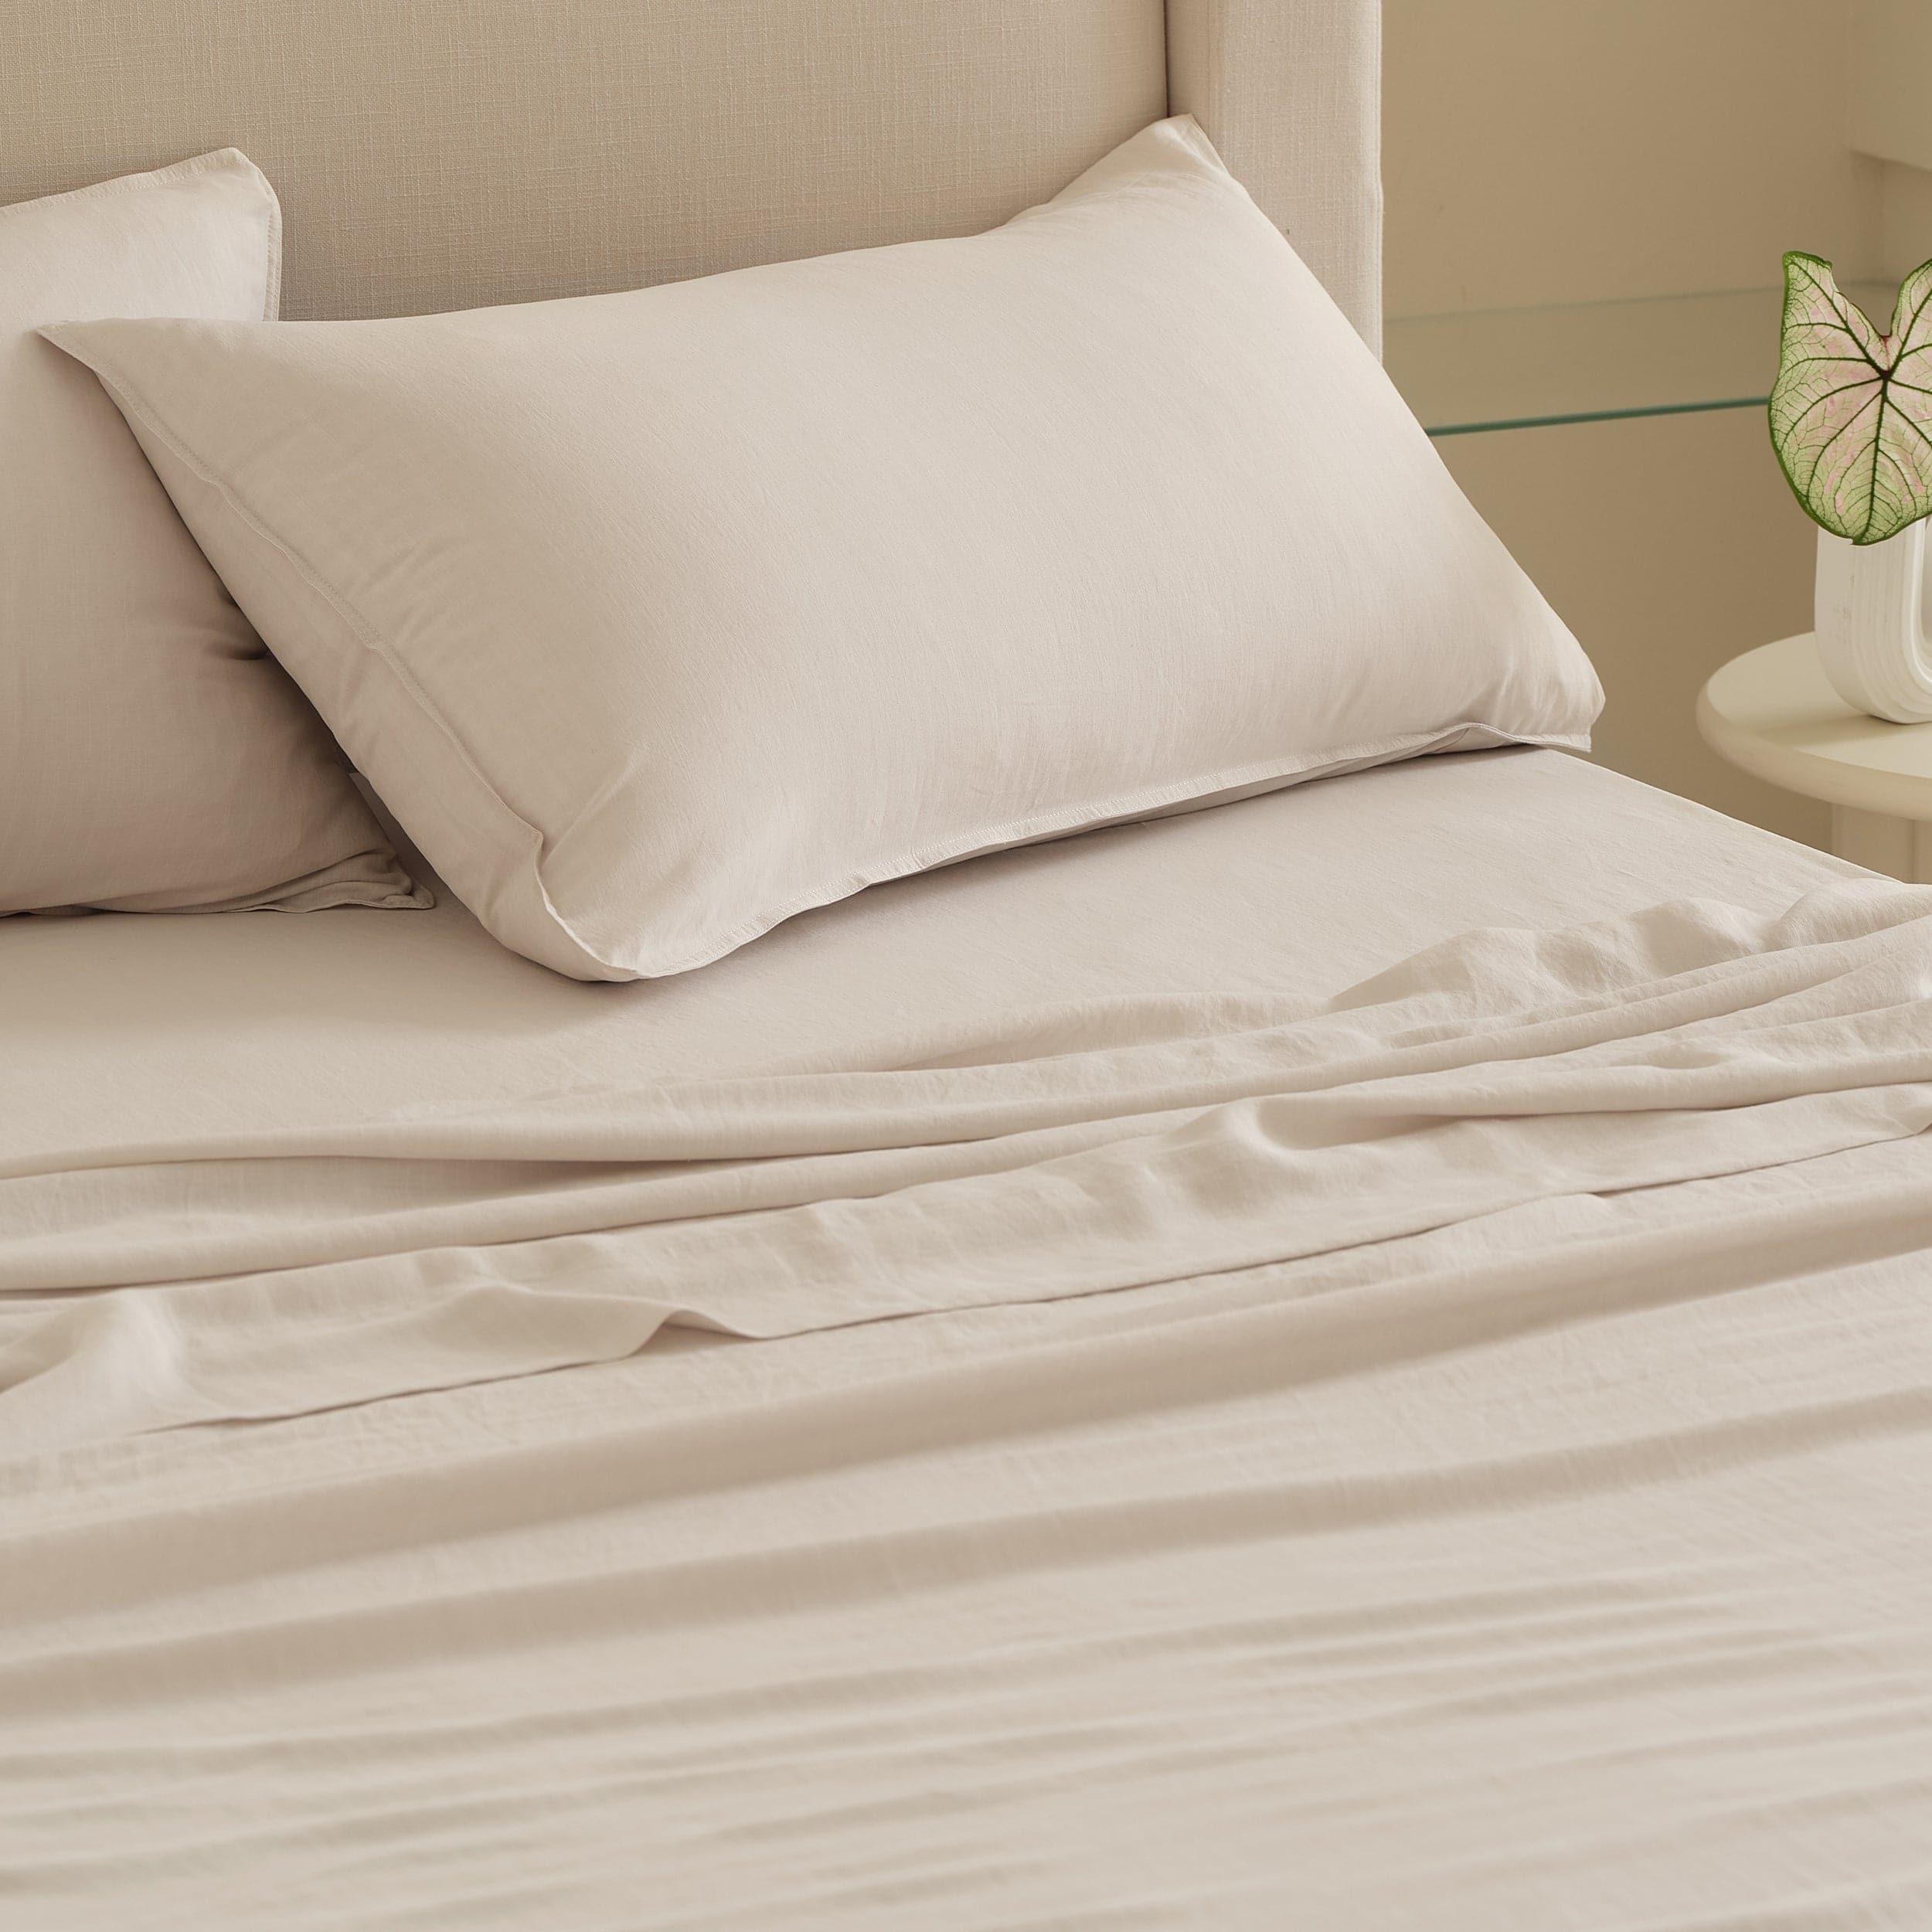 Enhance the beauty of your bed with a luxurious queen size sheet set that complements your decor.